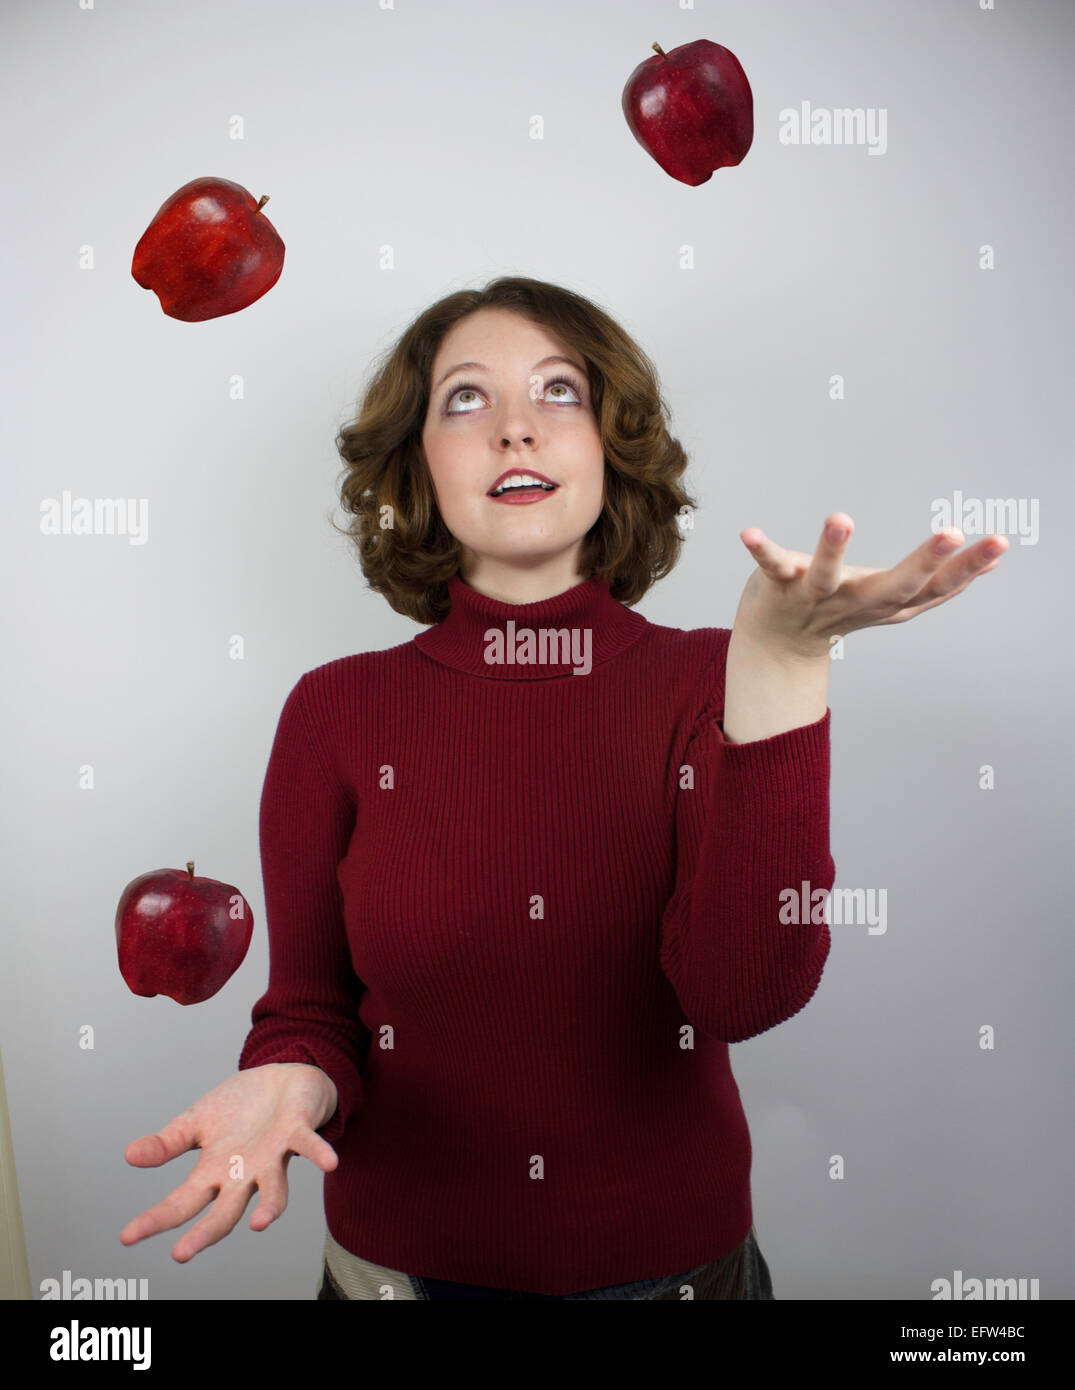 Pretty young woman wearing red sweater juggles apples Stock Photo